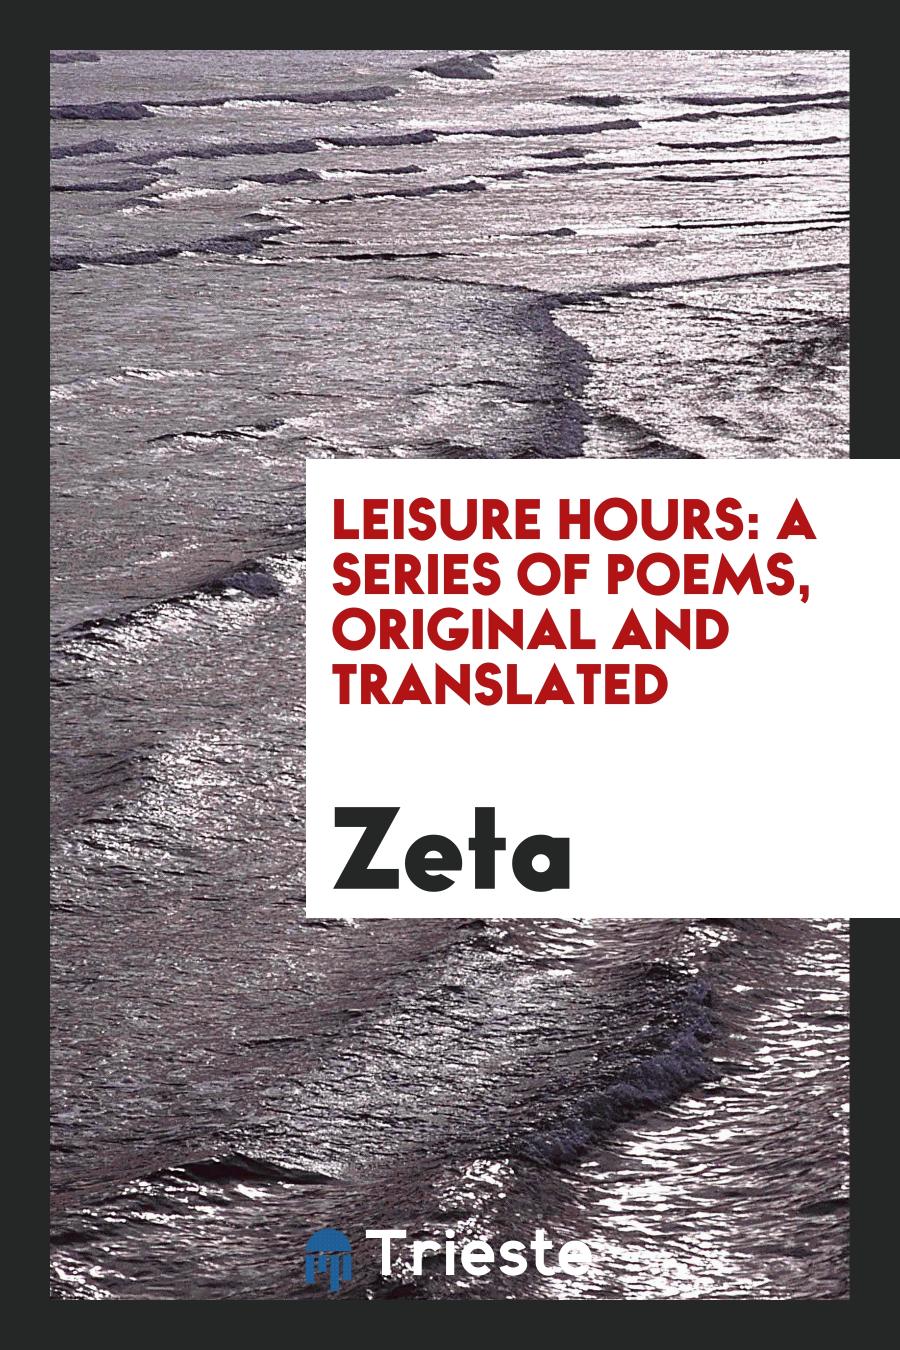 Leisure Hours: A Series of Poems, Original and Translated